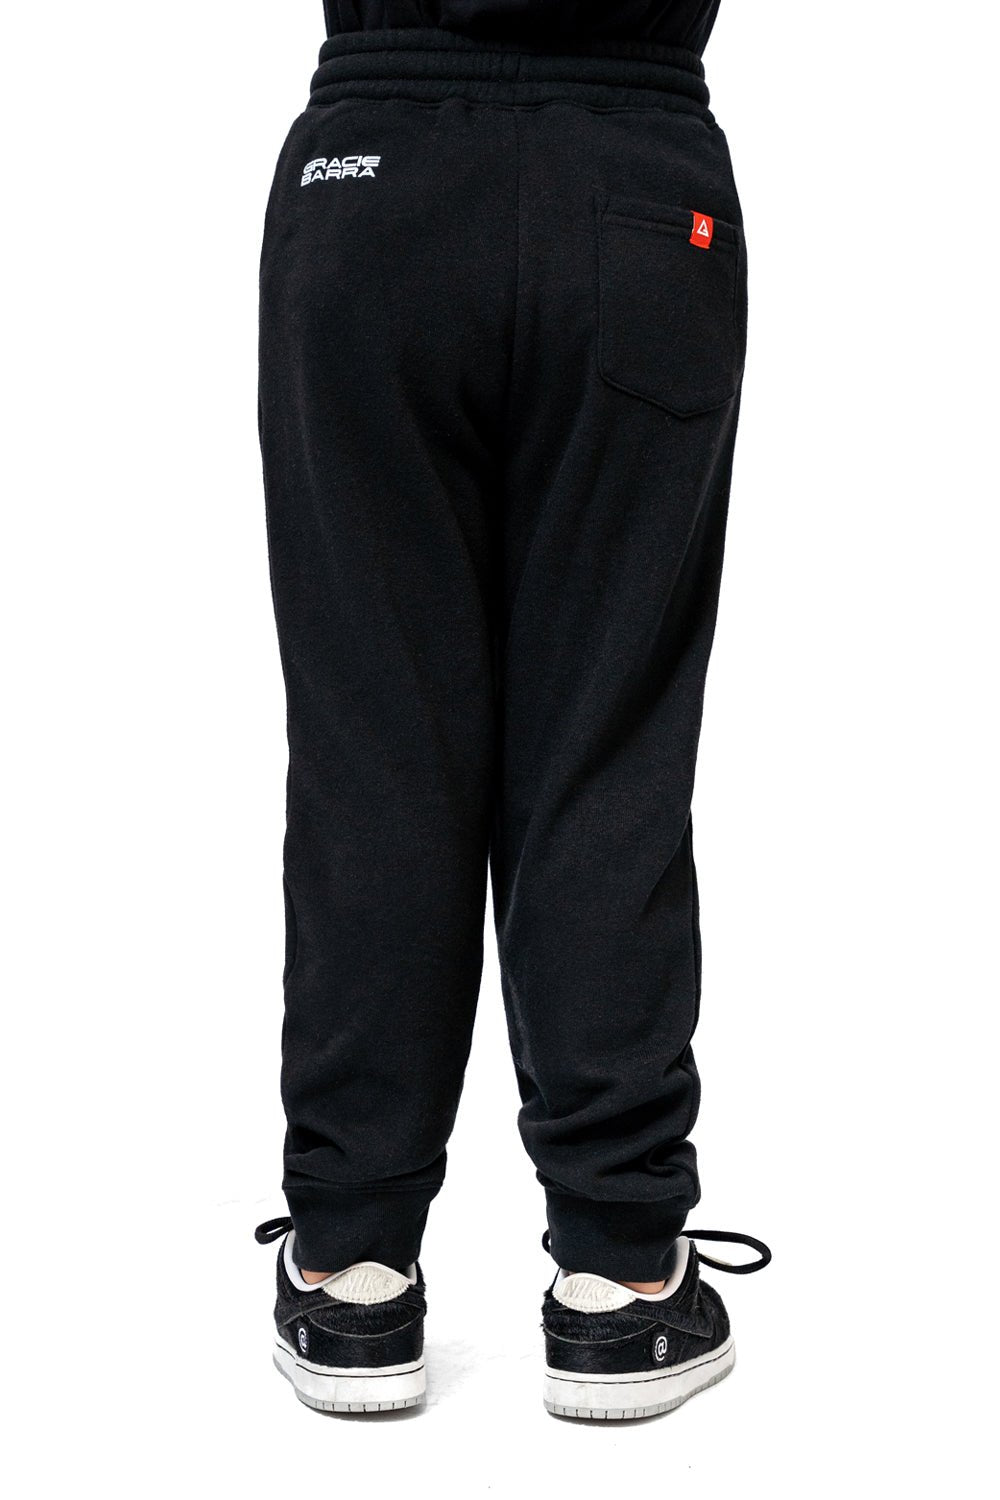 RS Youth Jogger - Black